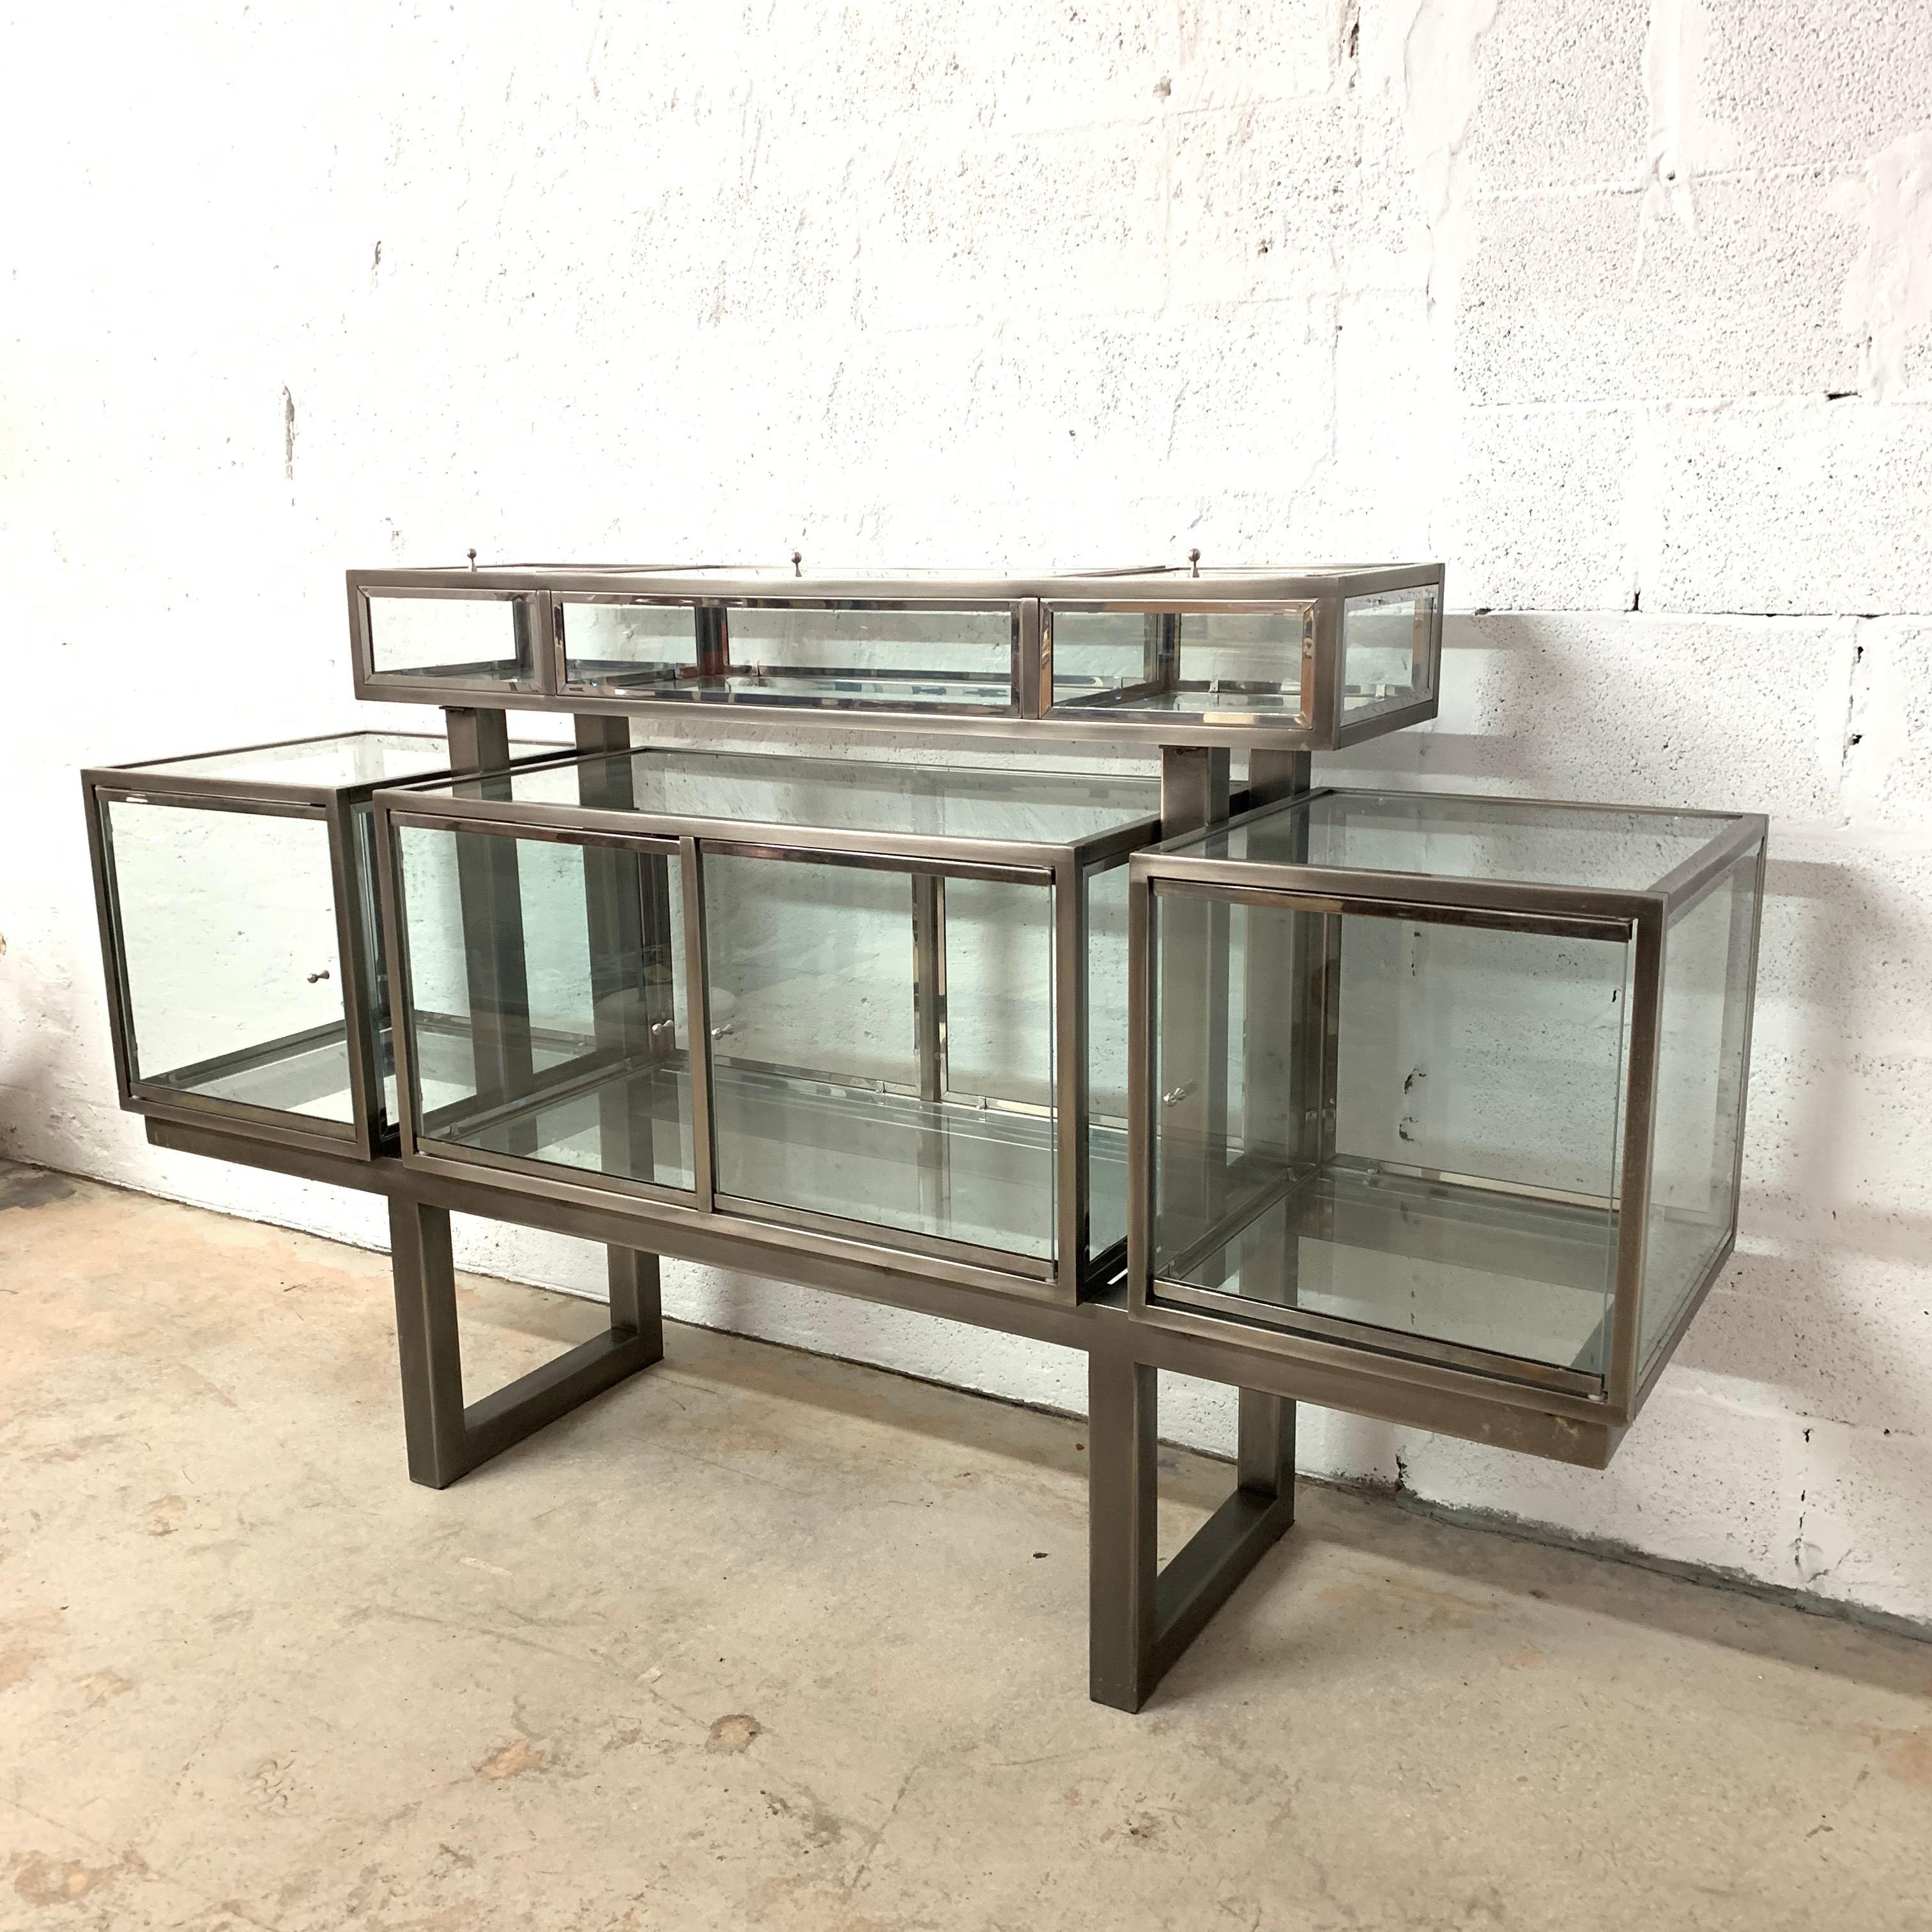 Postmodern display cabinet or vitrine. Composed of 6 compartments, 3 lower and 3 raised, each with glass doors for access. Rendered in brushed steel, polished chrome and glass by DIA, Design Institute of America, 1980s.

Dimensions:
18